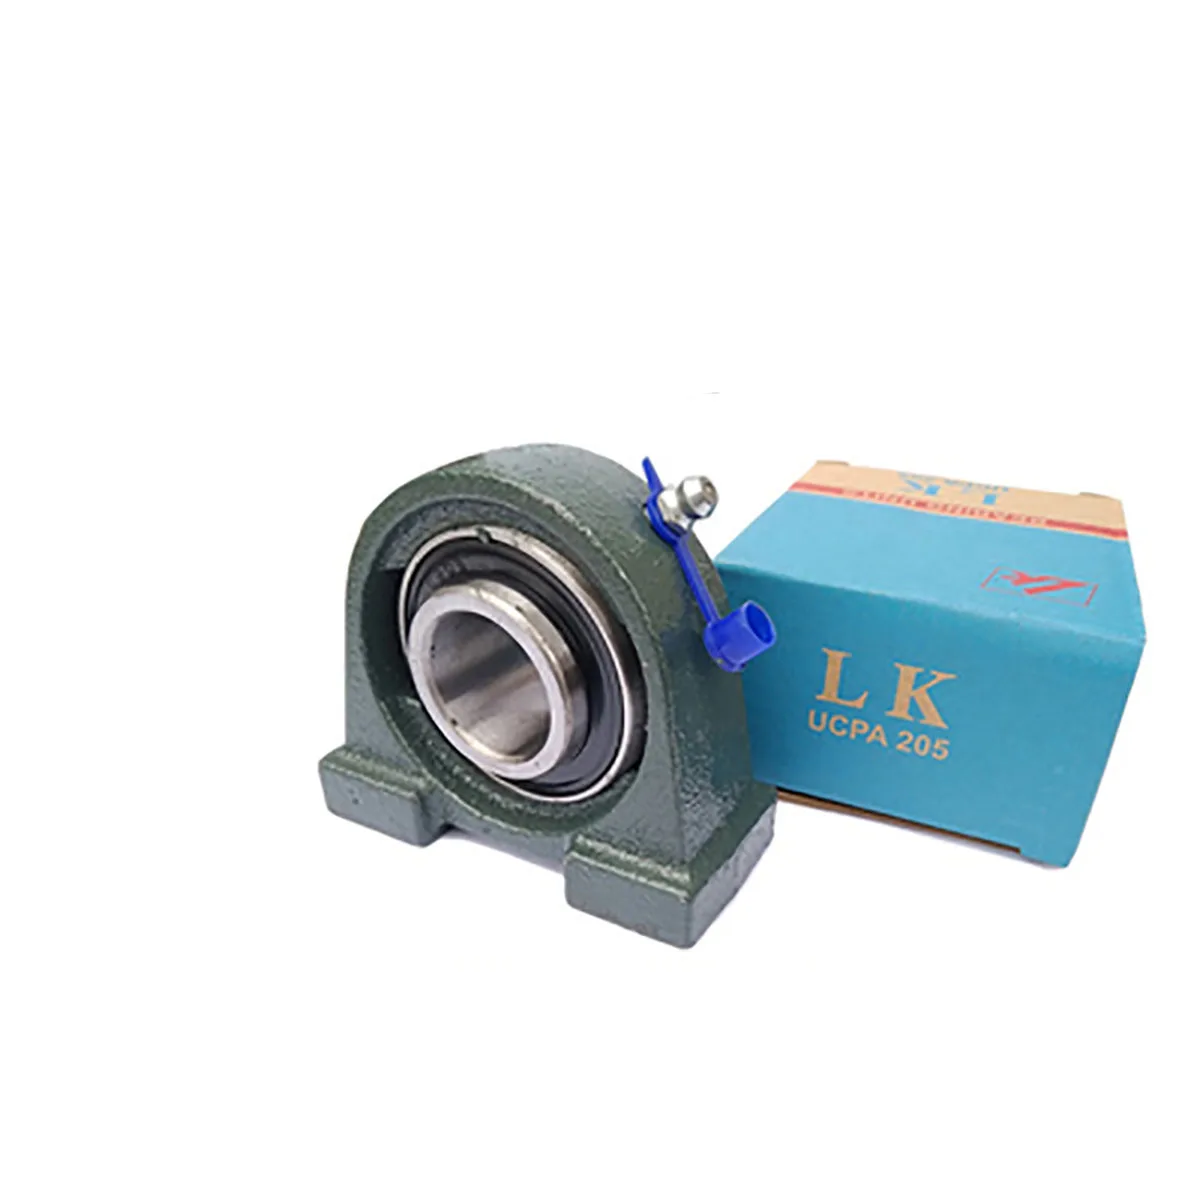 

1Pc LK Outer Spherical Plain Bearing with Seat UCPA204 205 206 207 208 209 210 212 Bore 20/25/30/35/40/45/50/60mm Cast Iron